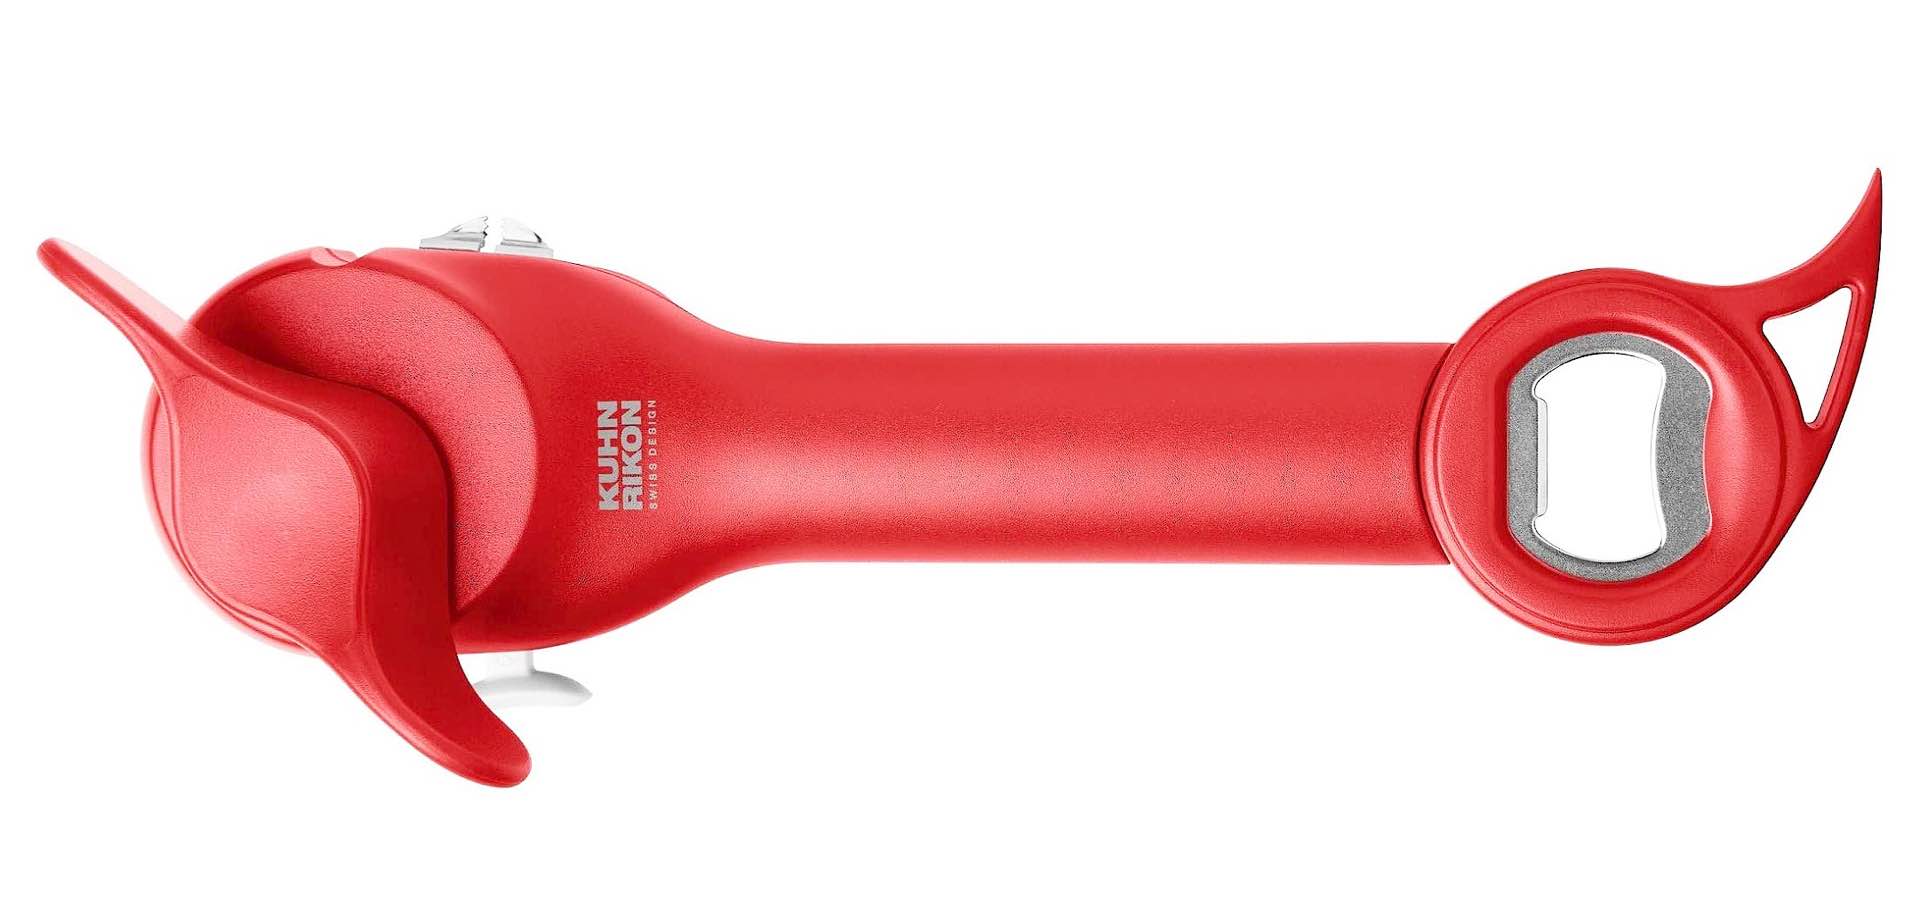 Kuhn Rikon Auto Safety Master Can & Bottle Opener — Tools and Toys